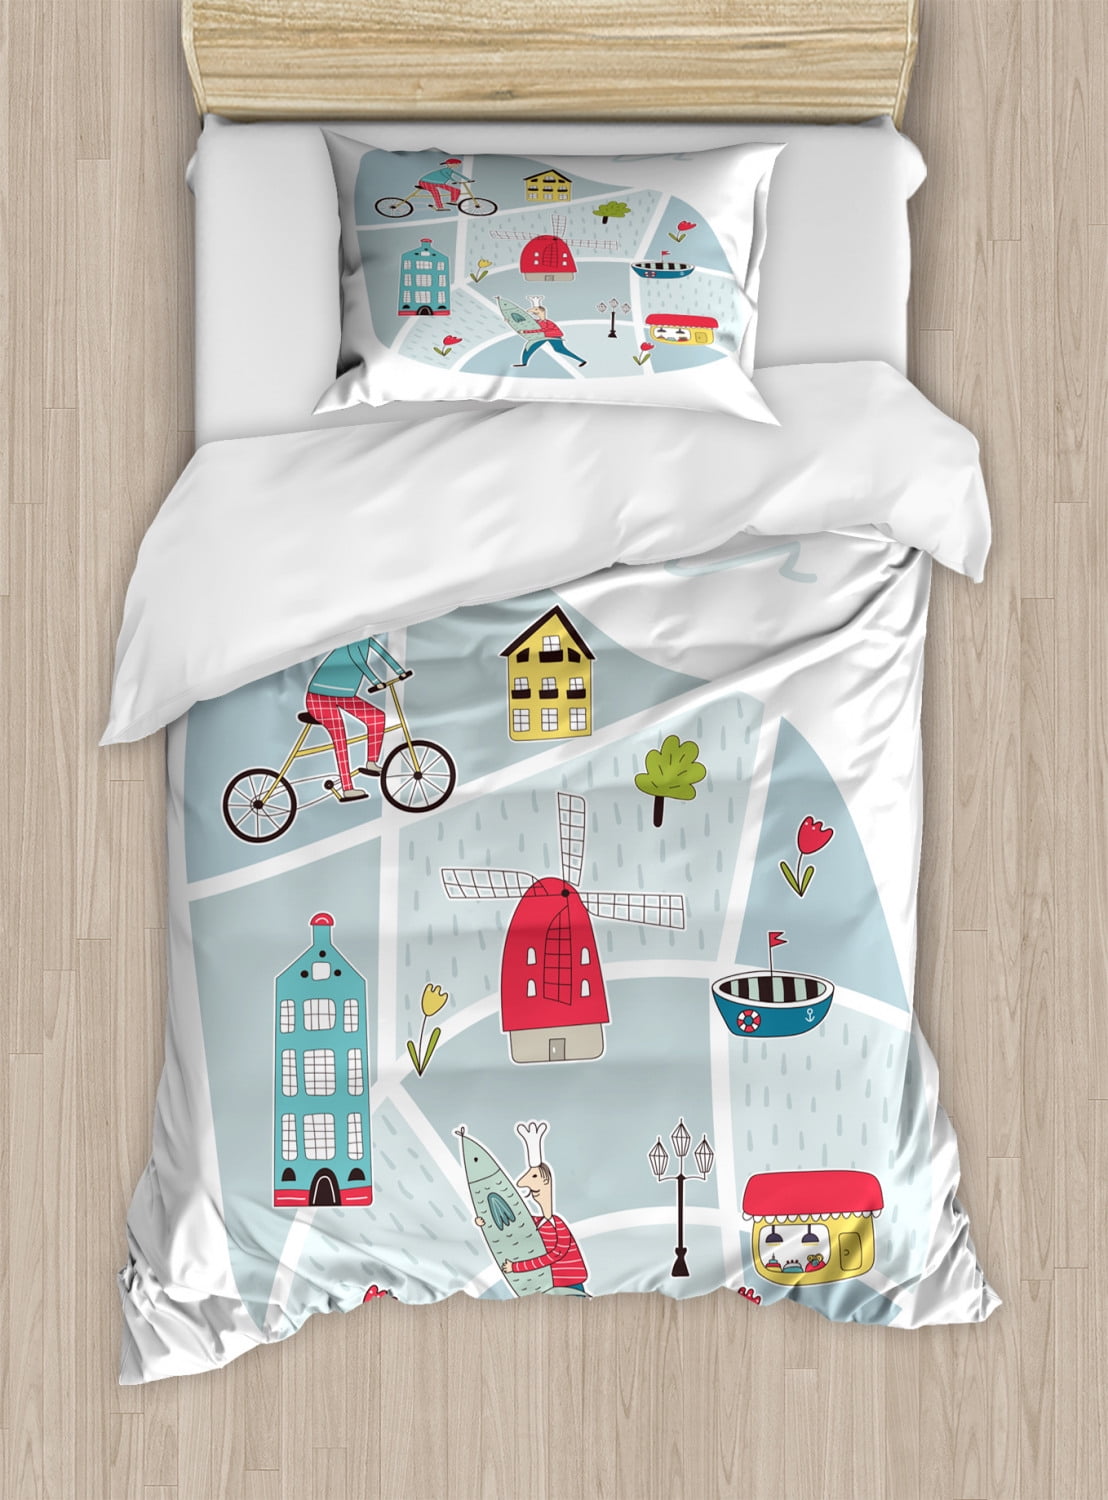 Amsterdam Duvet Cover Set Twin Style Composition of Men Houses Windmills Tulips Country View, Decorative 2 Bedding Set with 1 Pillow Sham, White and Multicolor, by Ambesonne - Walmart.com